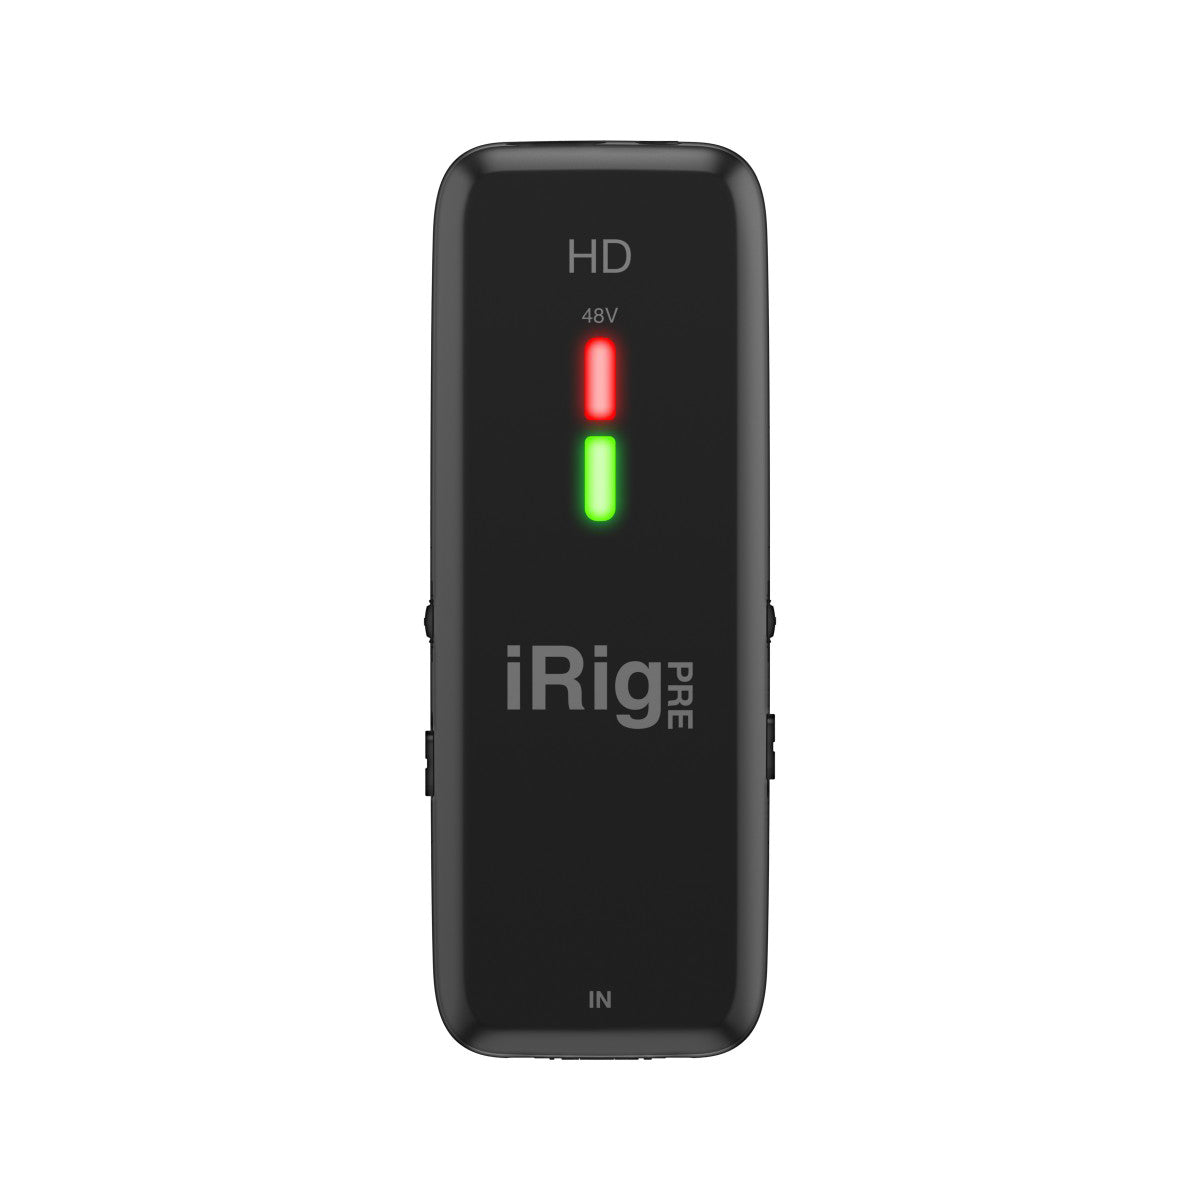 IK Multimedia iRig Pre HD high definition microphone interface with studio quality preamp